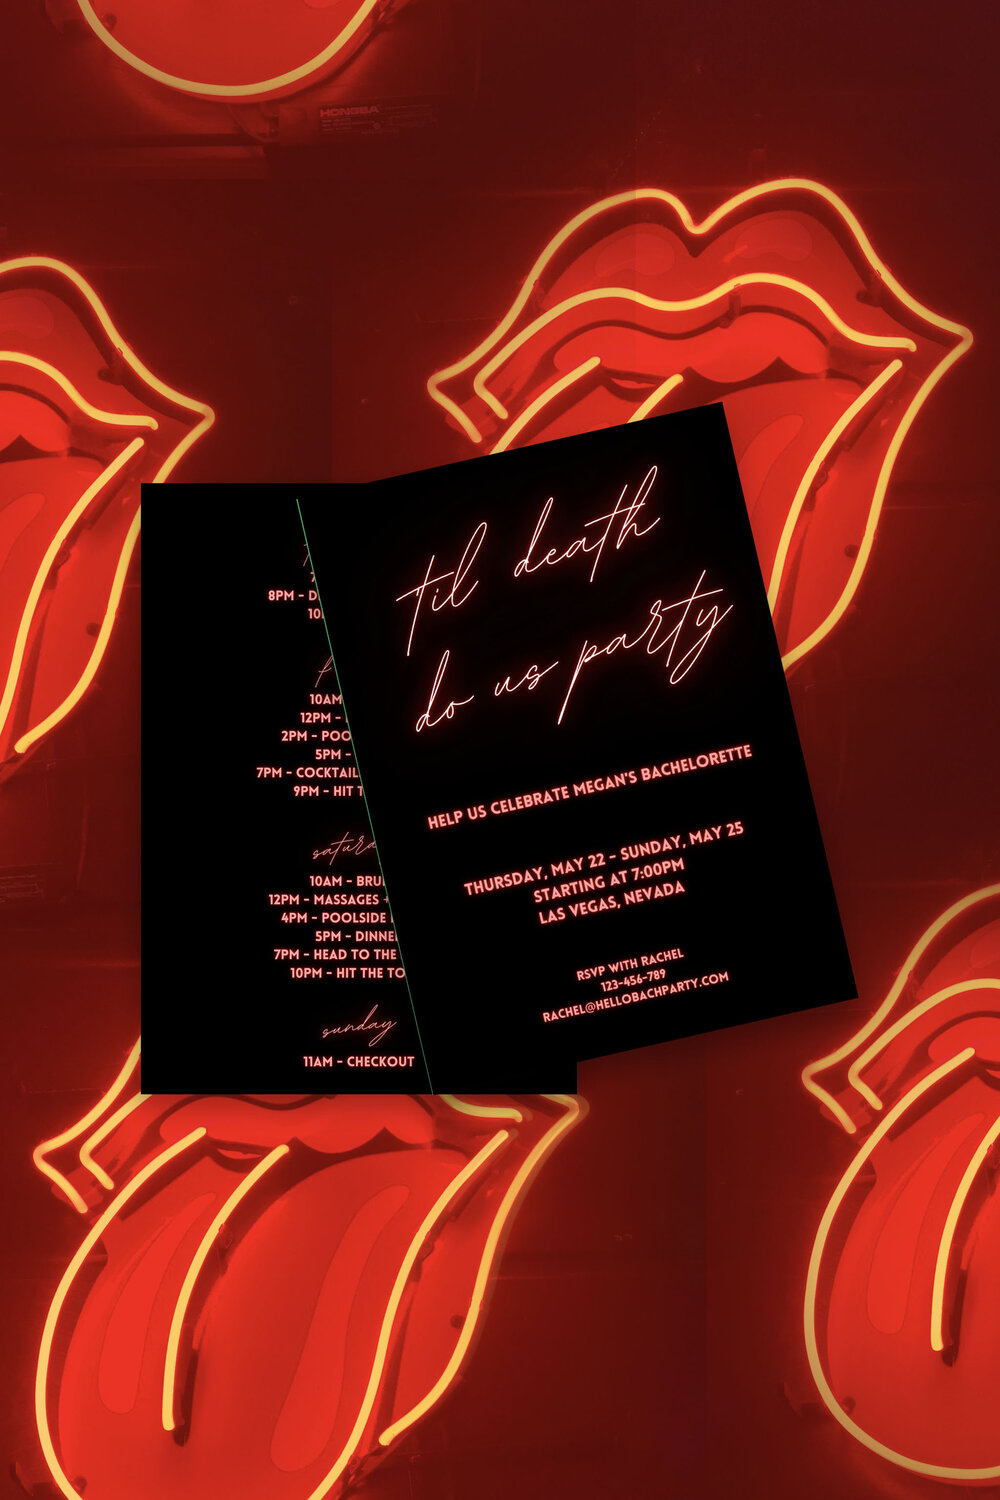 Til Death Do Us Party -  Bachelorette Invite and Itinerary 5x7 Digital Template for Canva